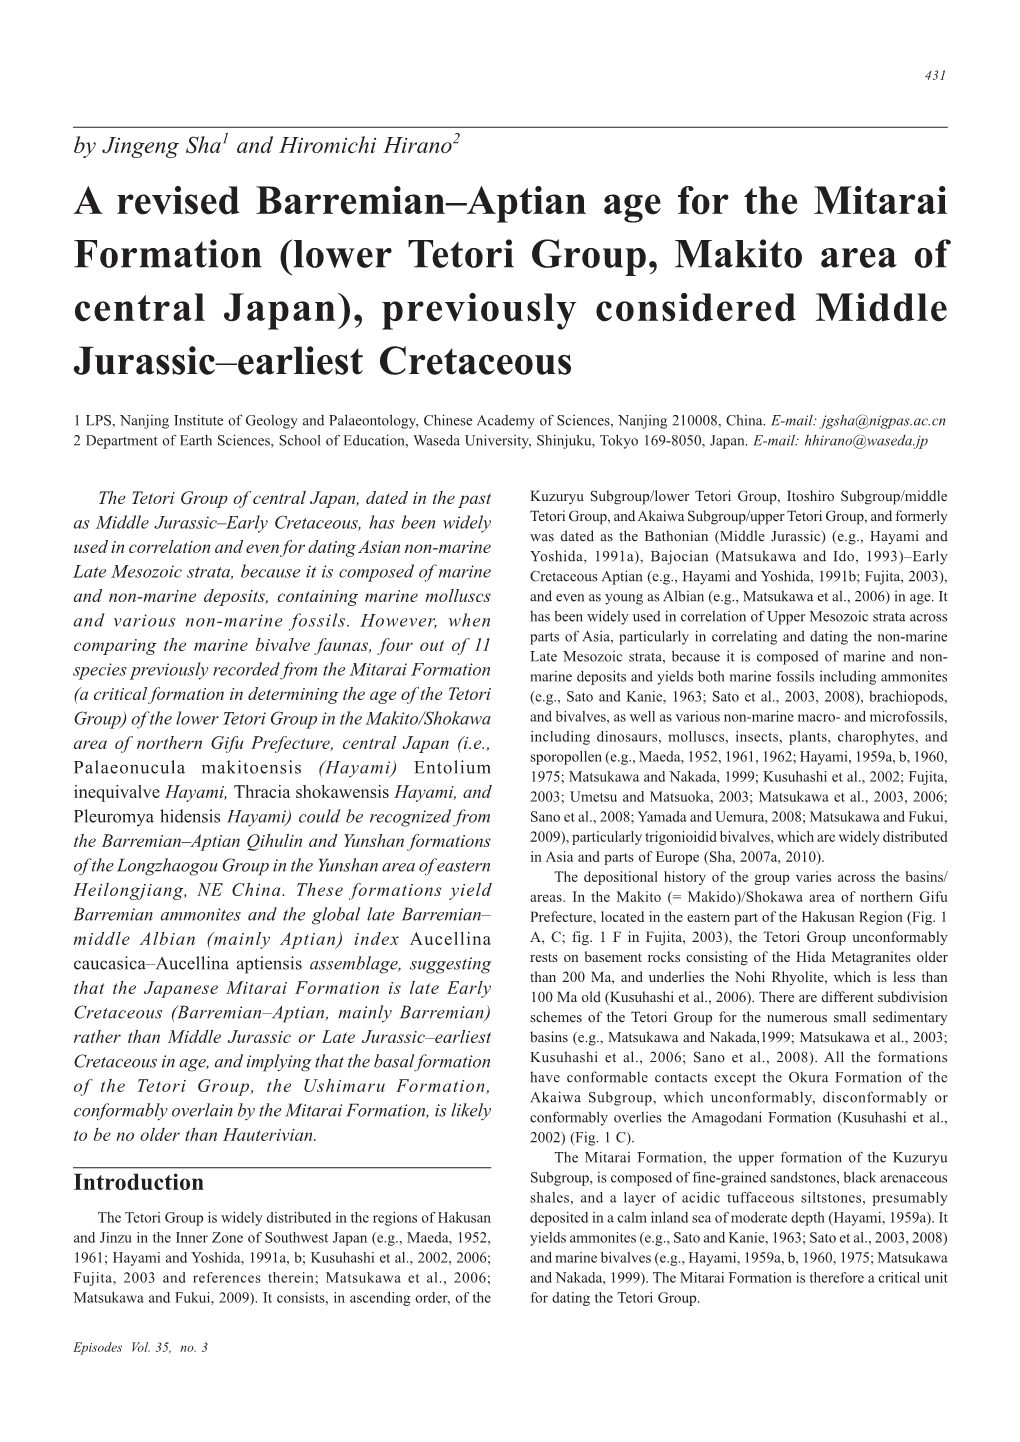 A Revised Barremian–Aptian Age for the Mitarai Formation (Lower Tetori Group, Makito Area of Central Japan), Previously Considered Middle Jurassic–Earliest Cretaceous